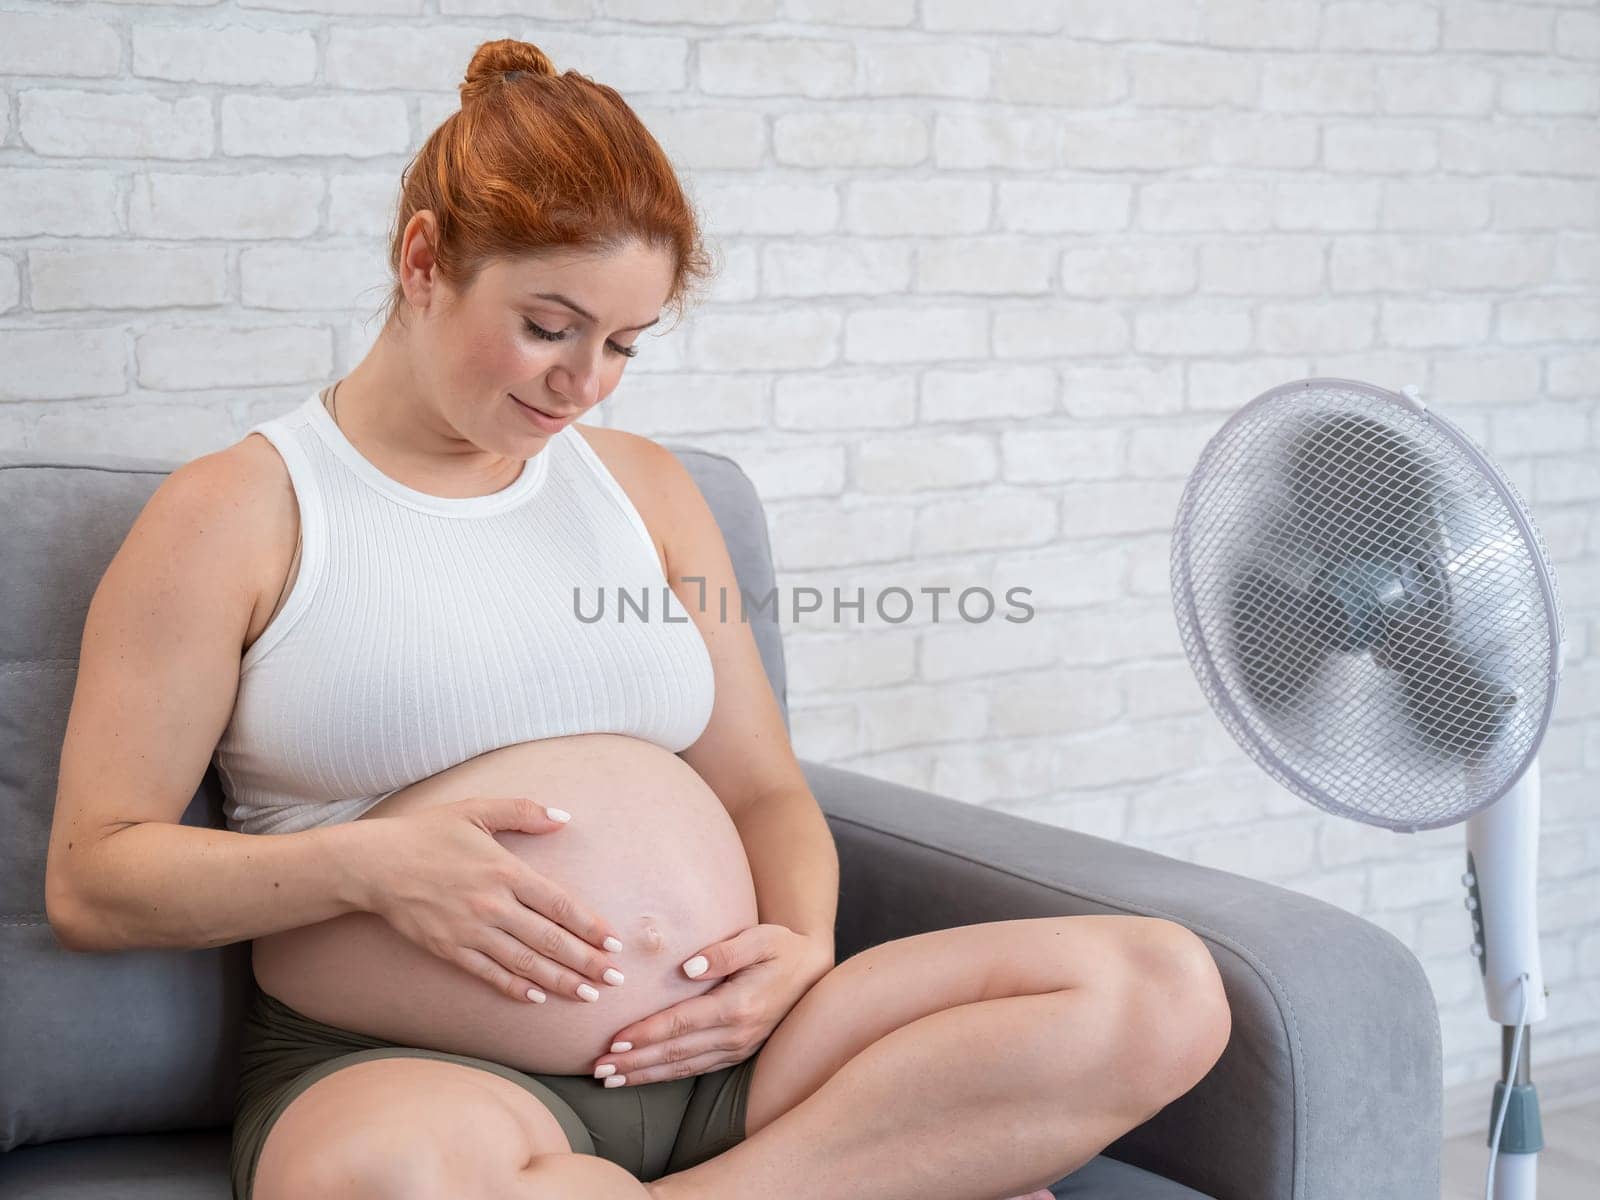 A pregnant woman is sitting on the couch, stroking her tummy and enjoying the cool air from an electric fan. by mrwed54